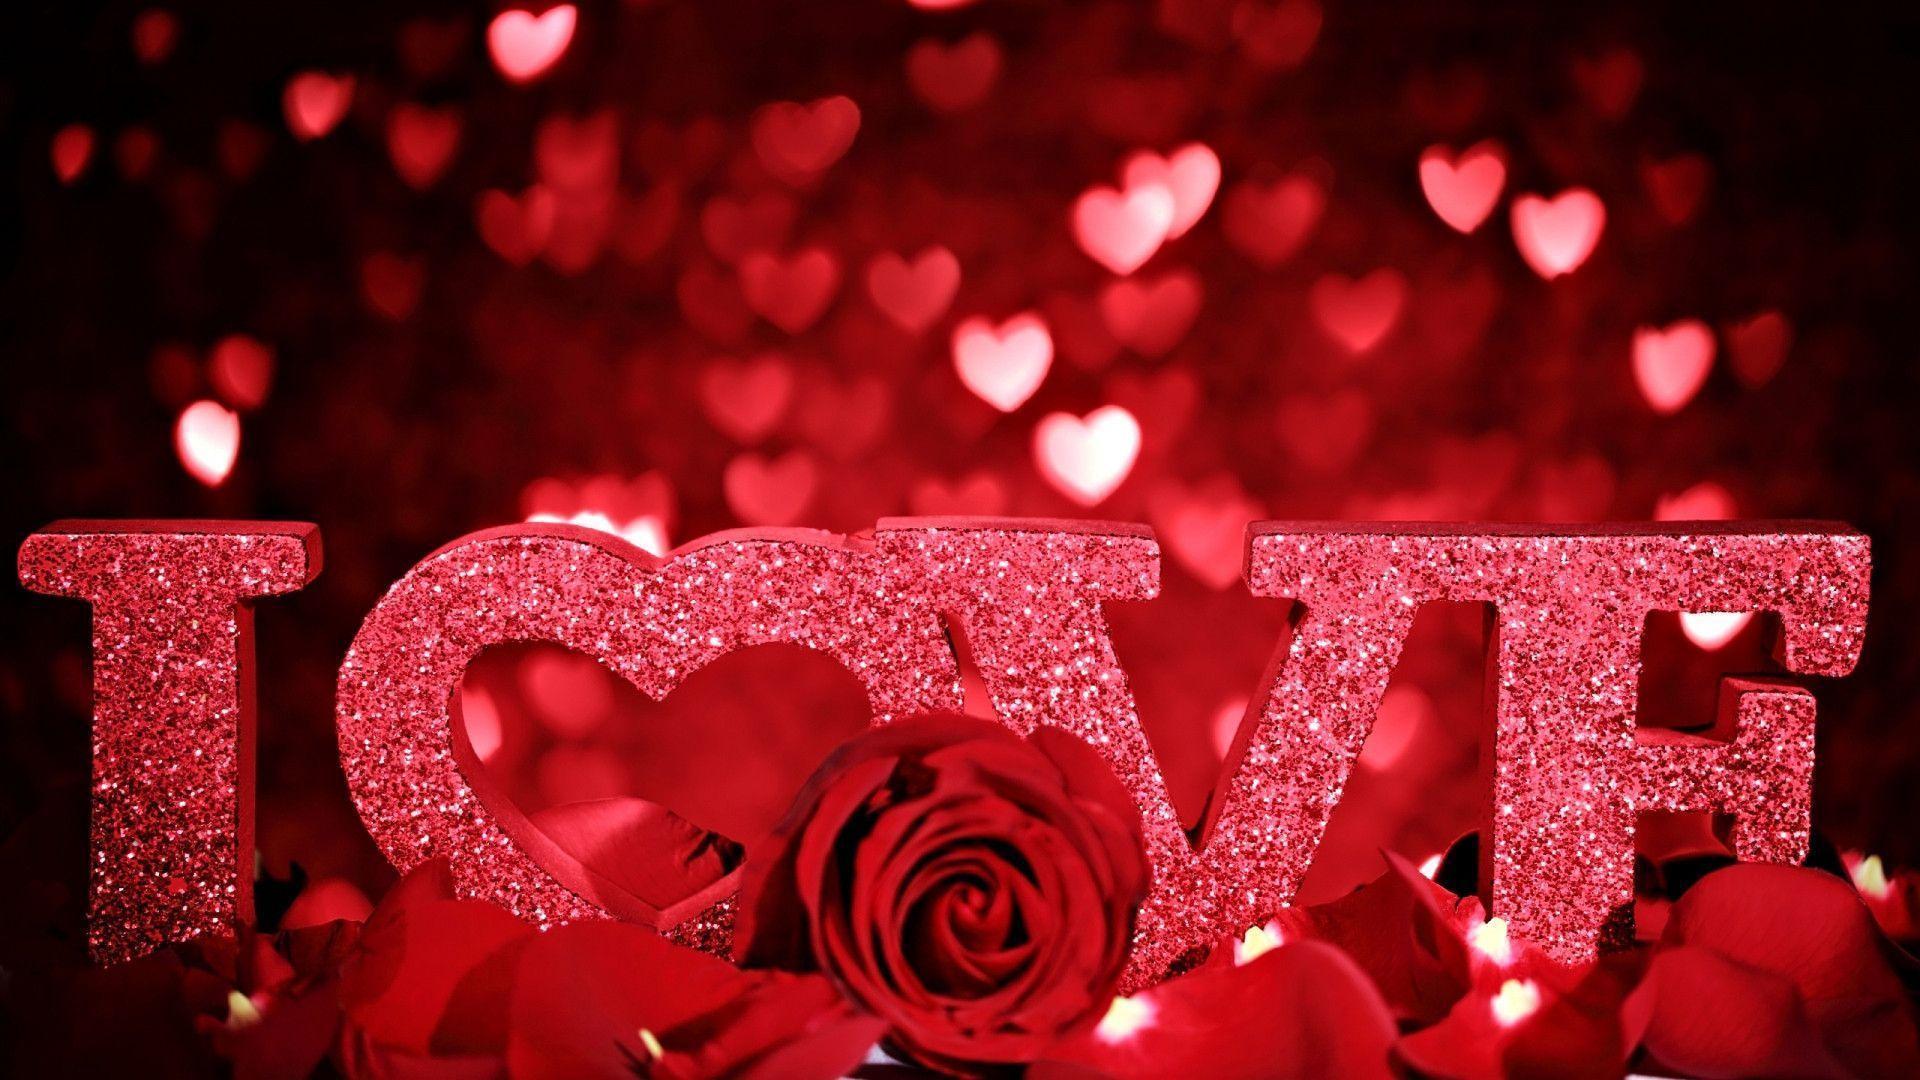 I Love You Background Wallpaper Image & Picture